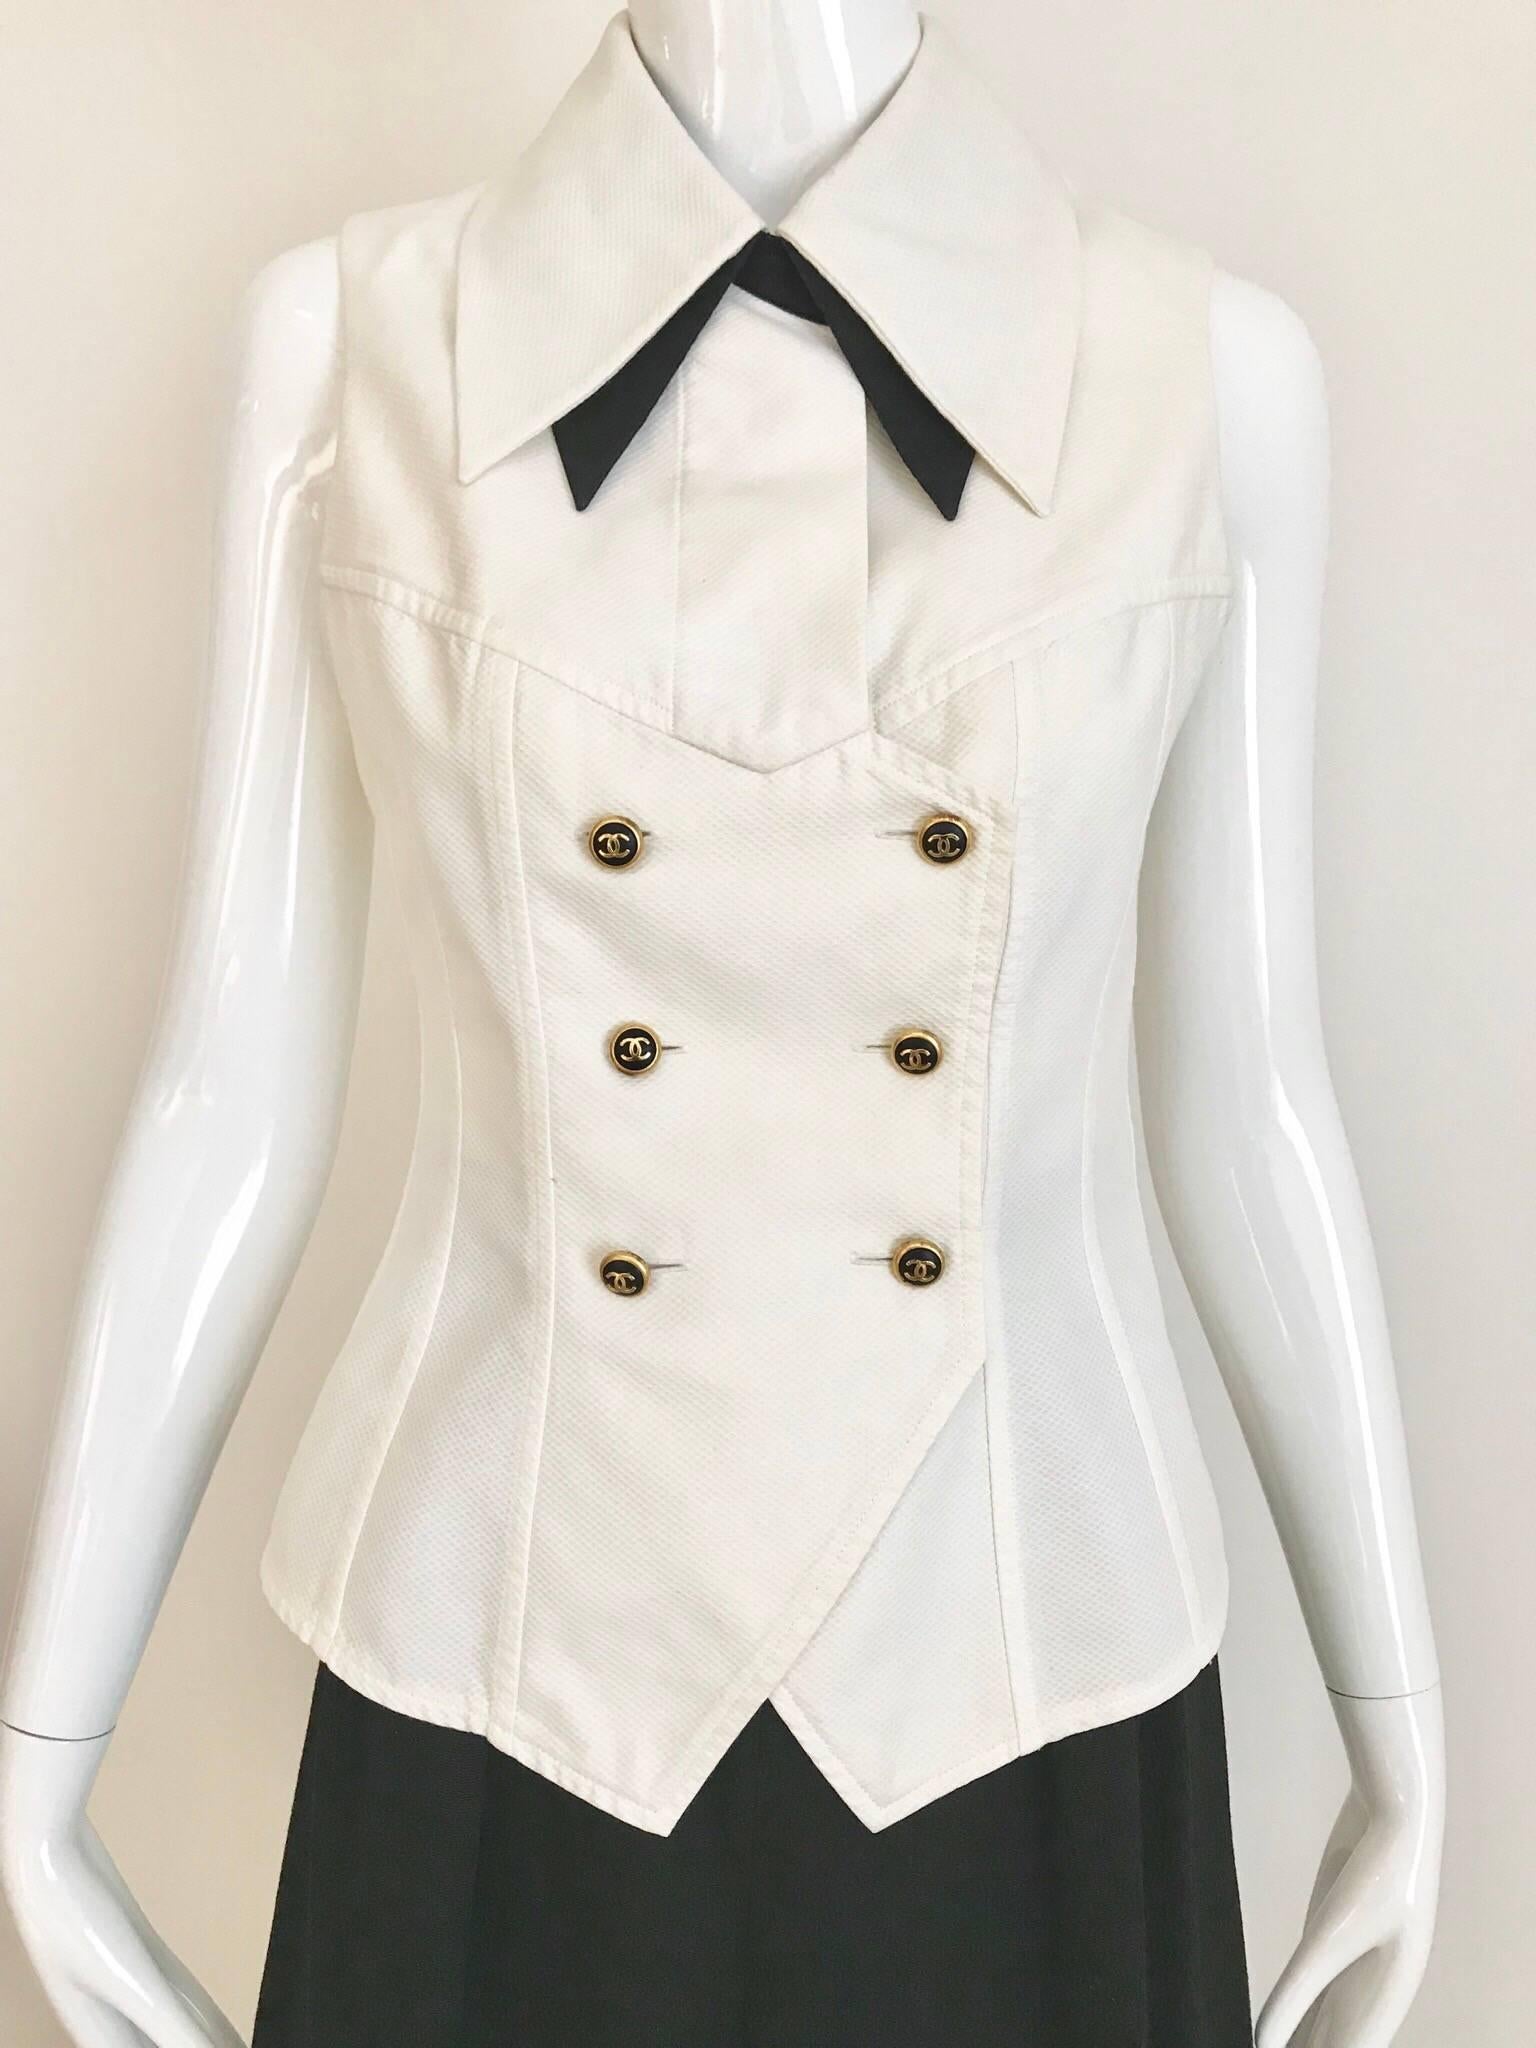 Chic vintage white cotton Chanel sleeveless vest top and black silk tuxedo pant suit set.
Chanel Top/Vest: Bust: 32 inches/ Waist: 26.5 inches/ Hip: 34 inches
Chanel Pants: Waist: 25 inches/ Hip; 39 inches/  Inseam: 30 inches/ Lenght: 43 inches